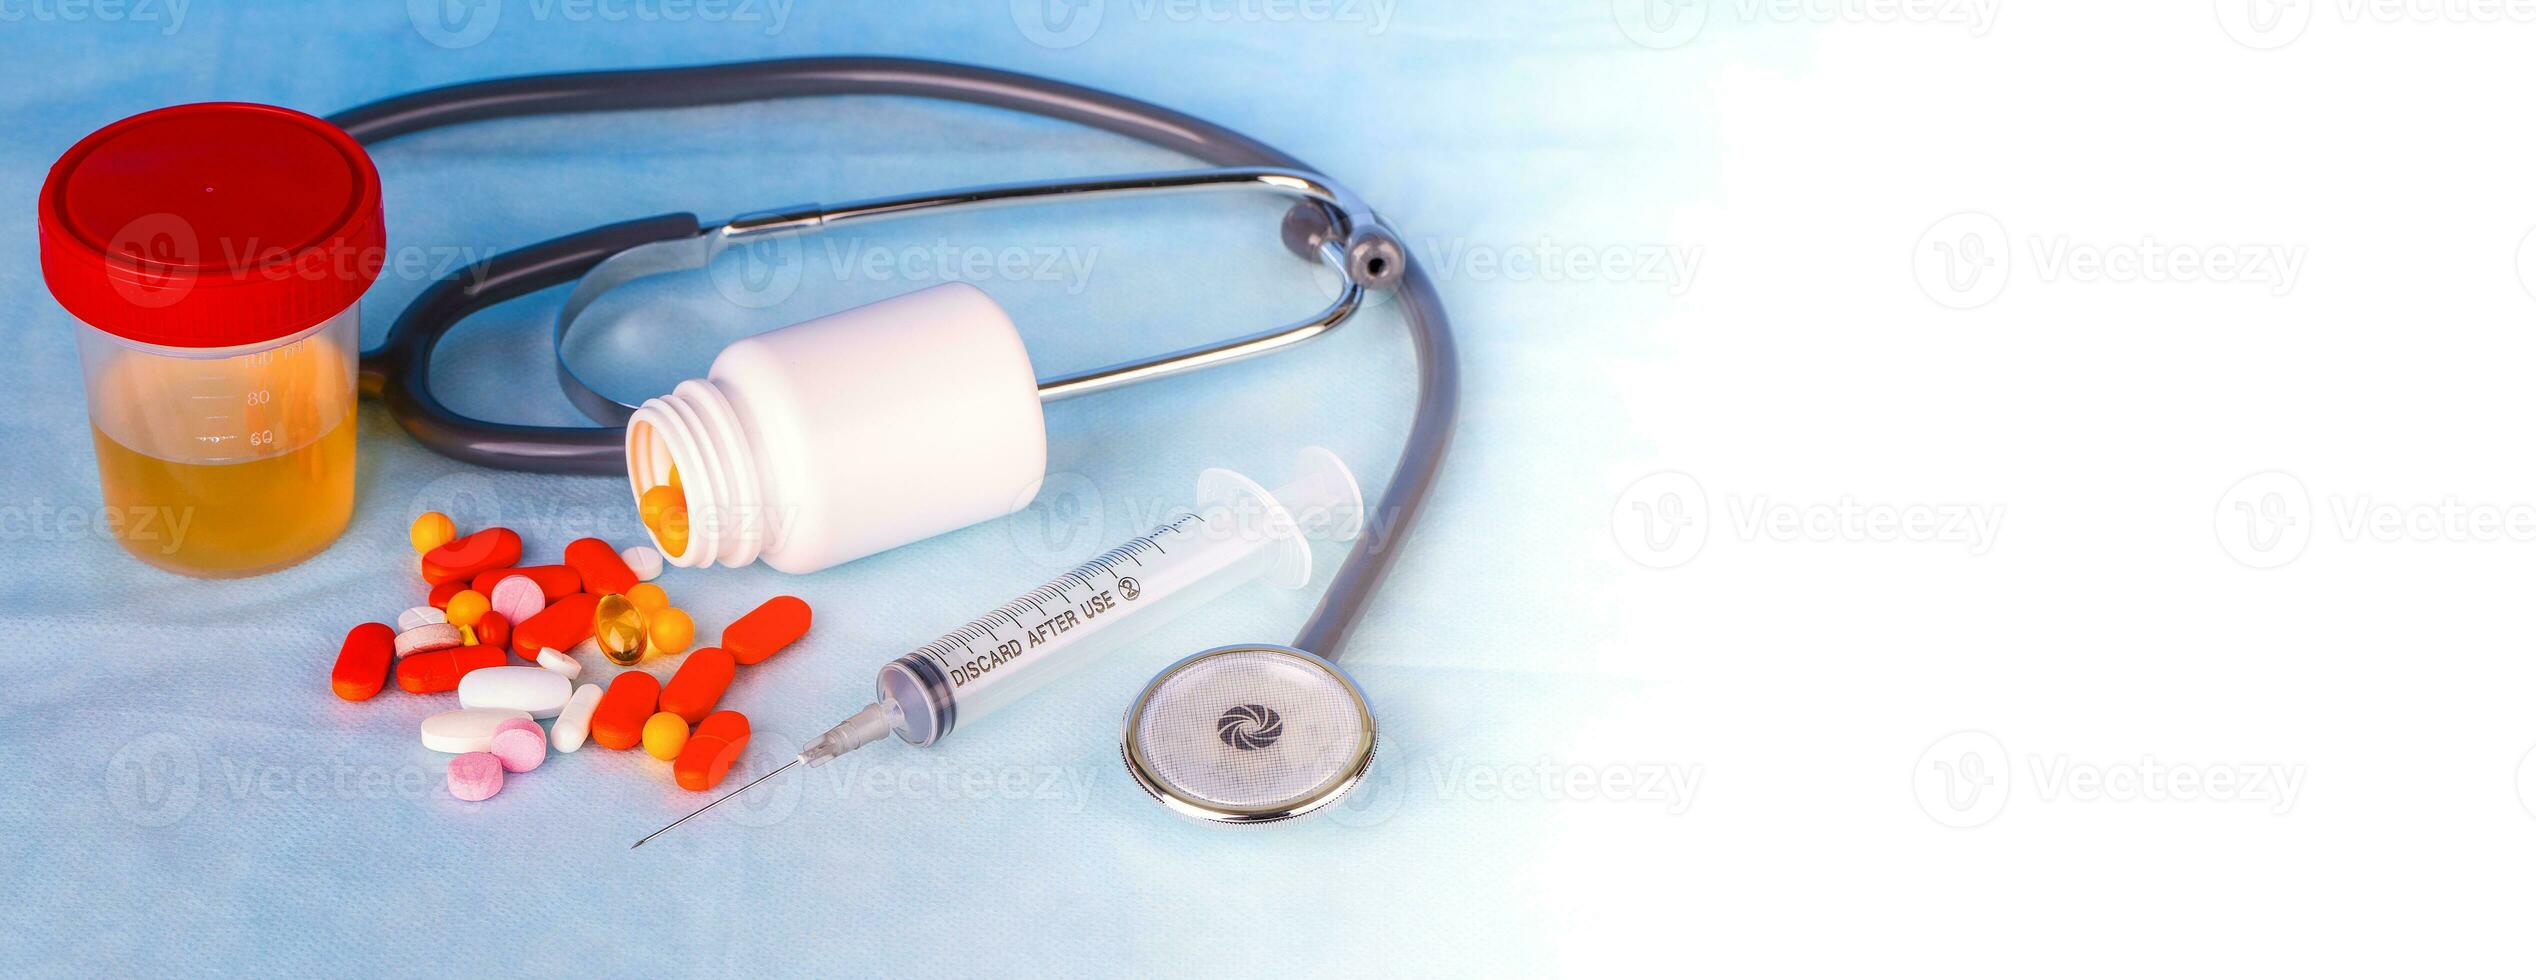 Close up of urine containers for test, syringe, phonedoscope and colored pills on blue background photo